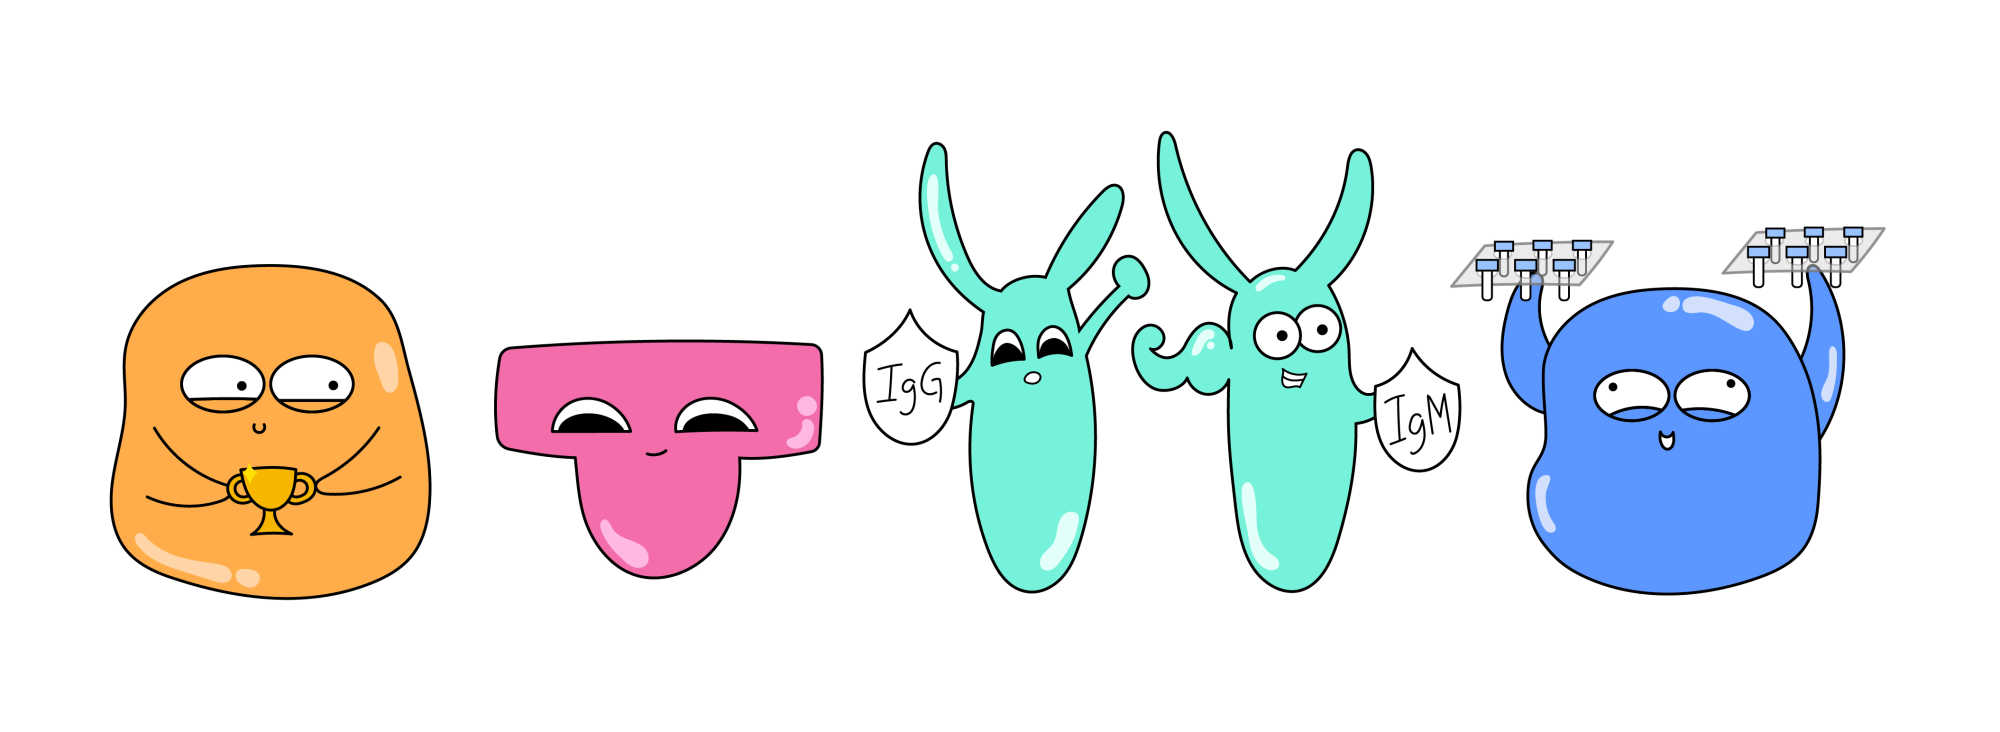 Illustration of four characters representing different test types: PCR, antigen, antibody (IgG and IgM), and pooled testing. 